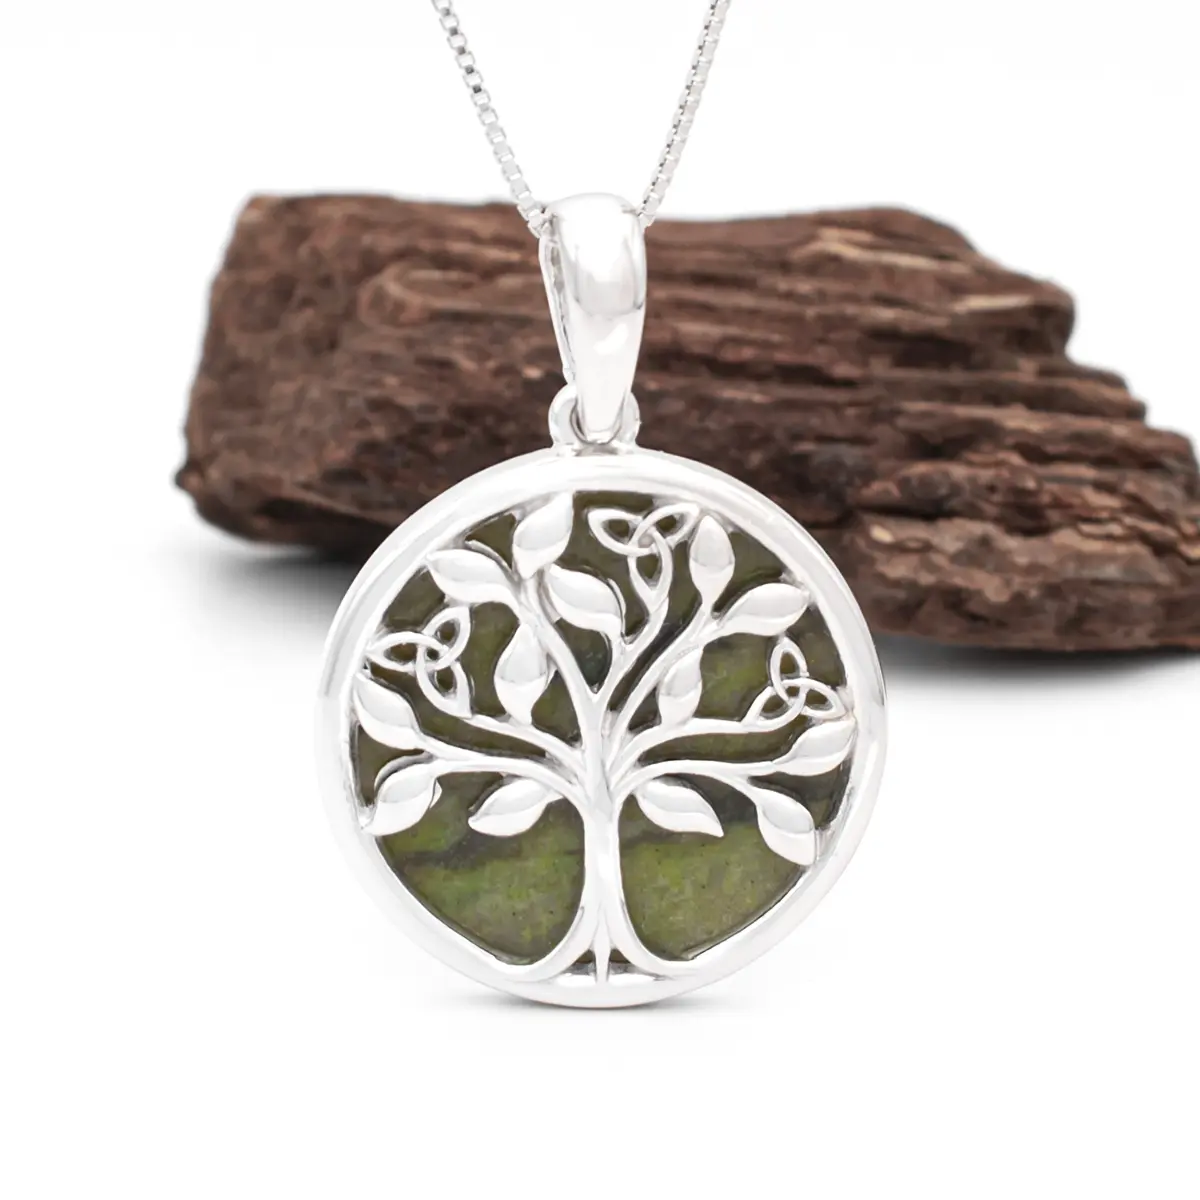 Sterling Silver Tree Of Life Necklace Featuring Connemara Marble